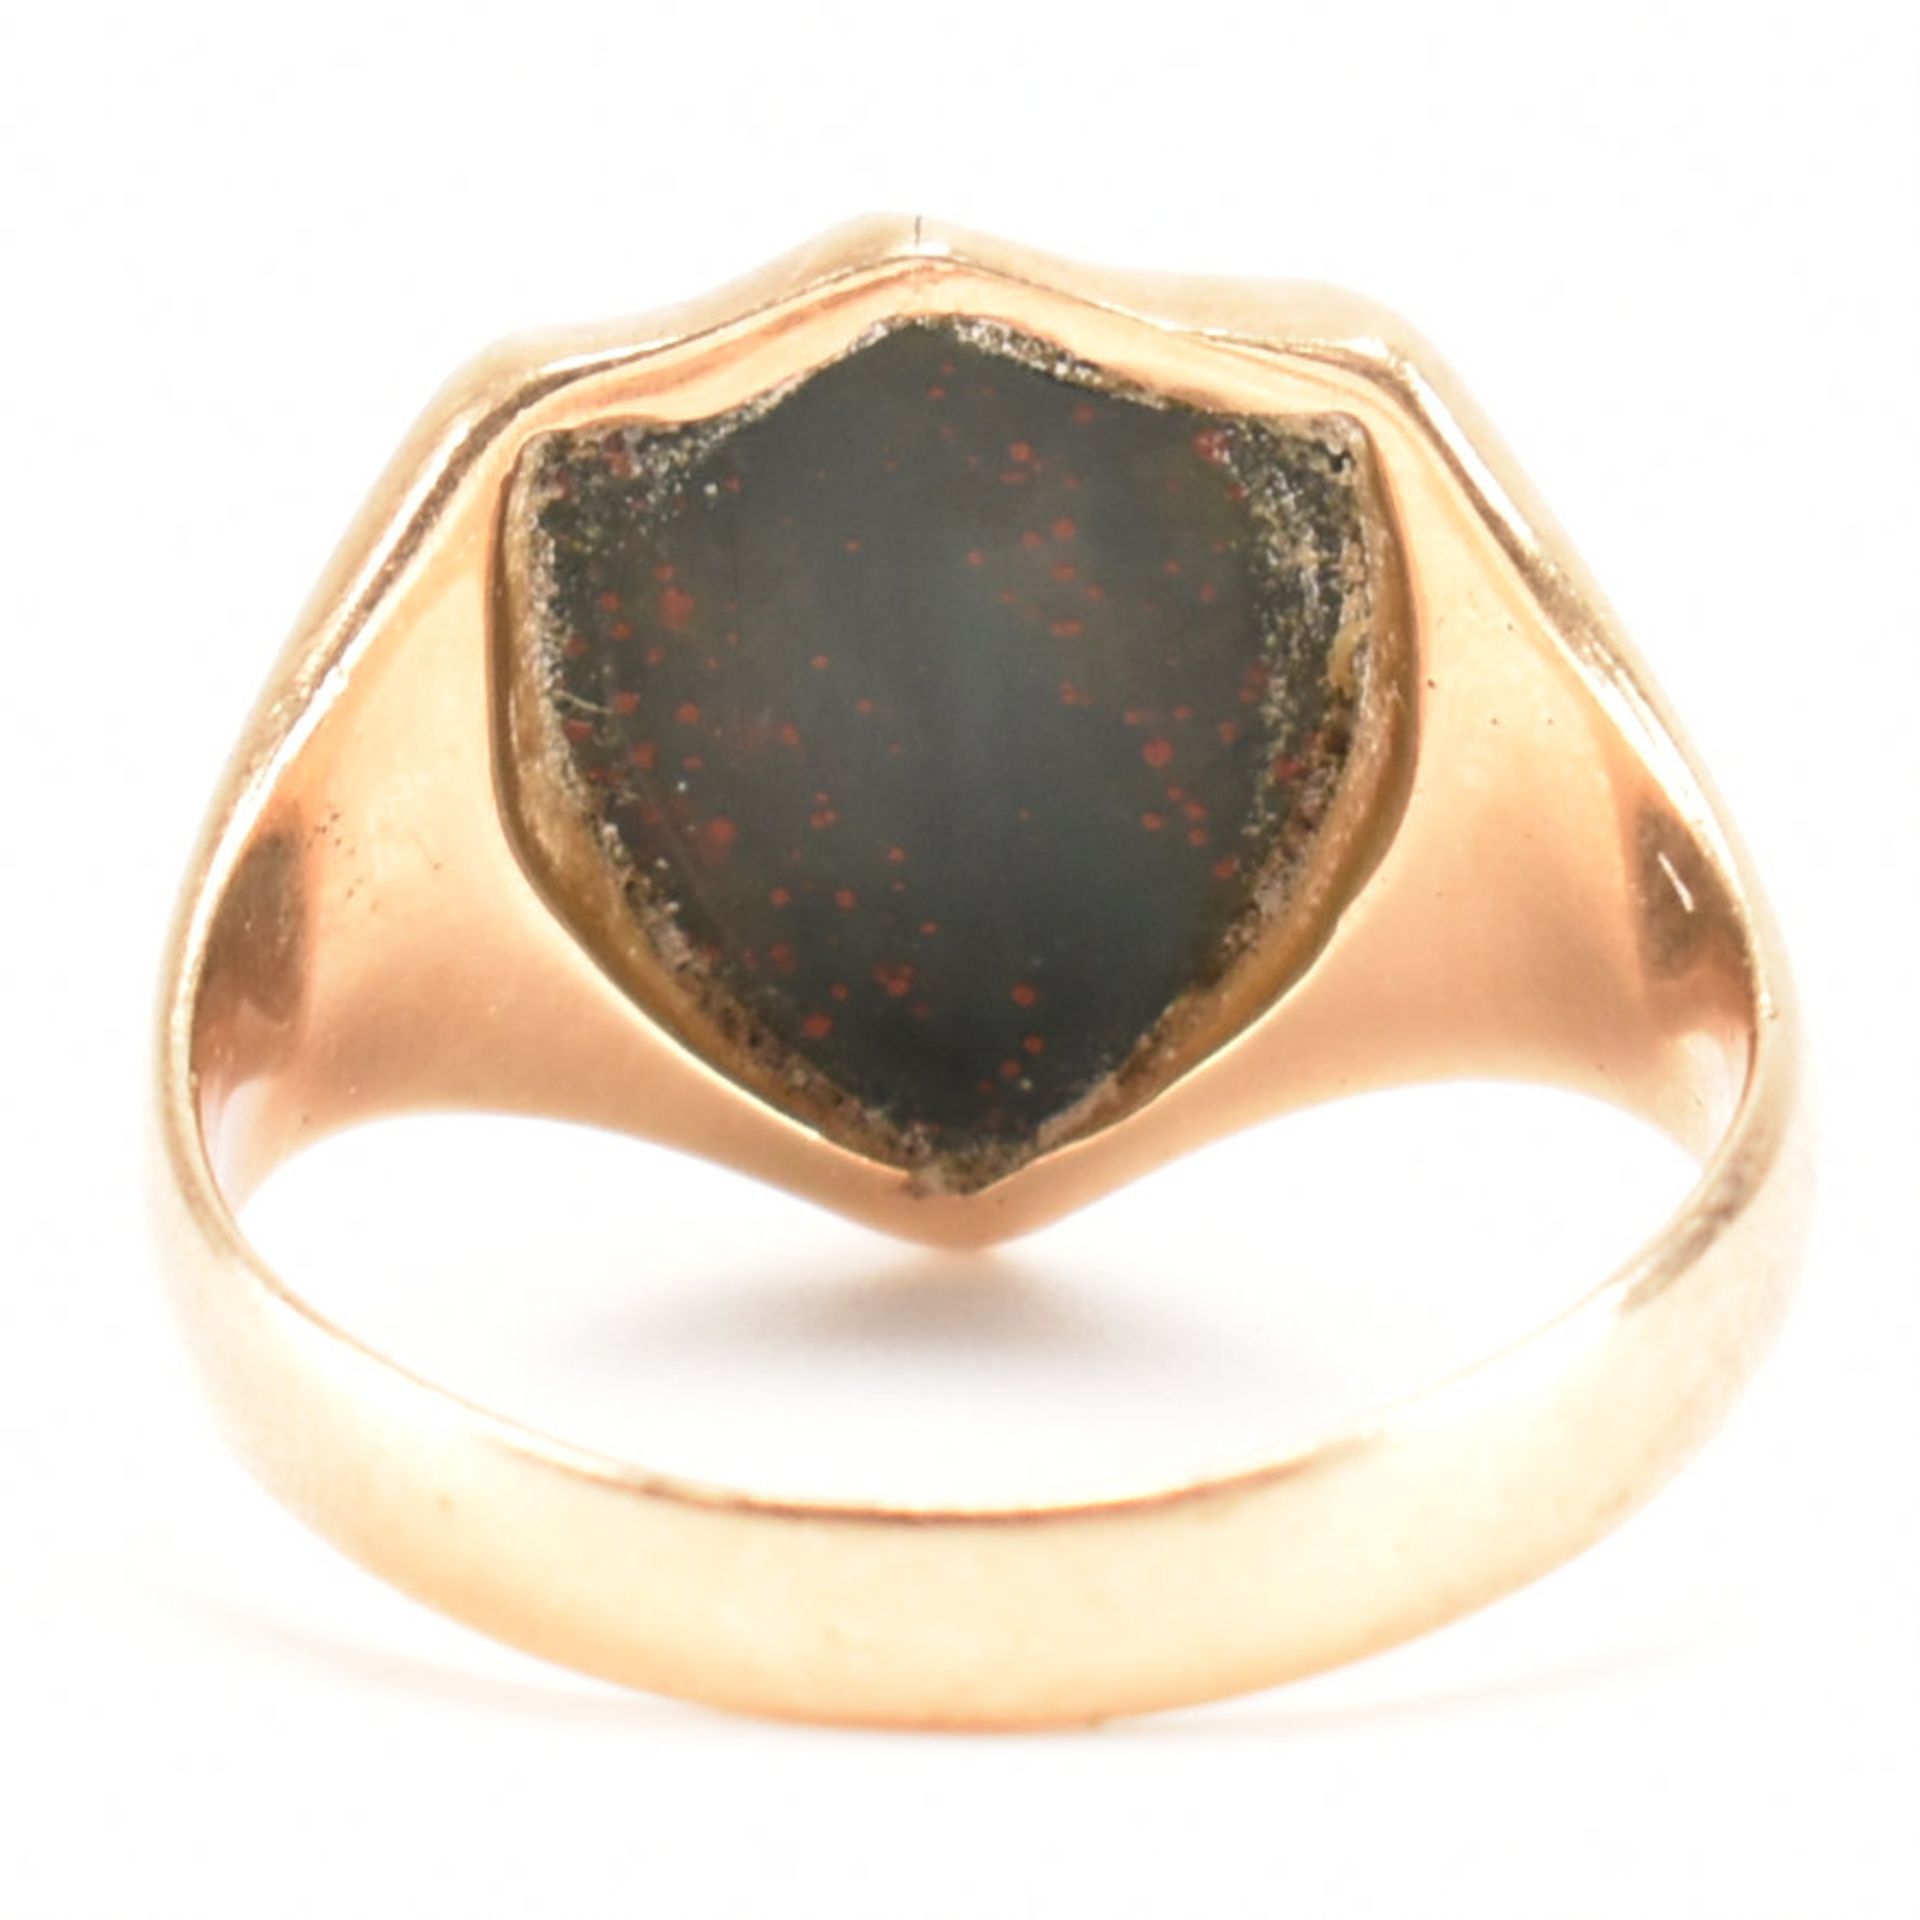 VICTORIAN 15CT GOLD & BLOODSTONE SIGNET RING - Image 3 of 9